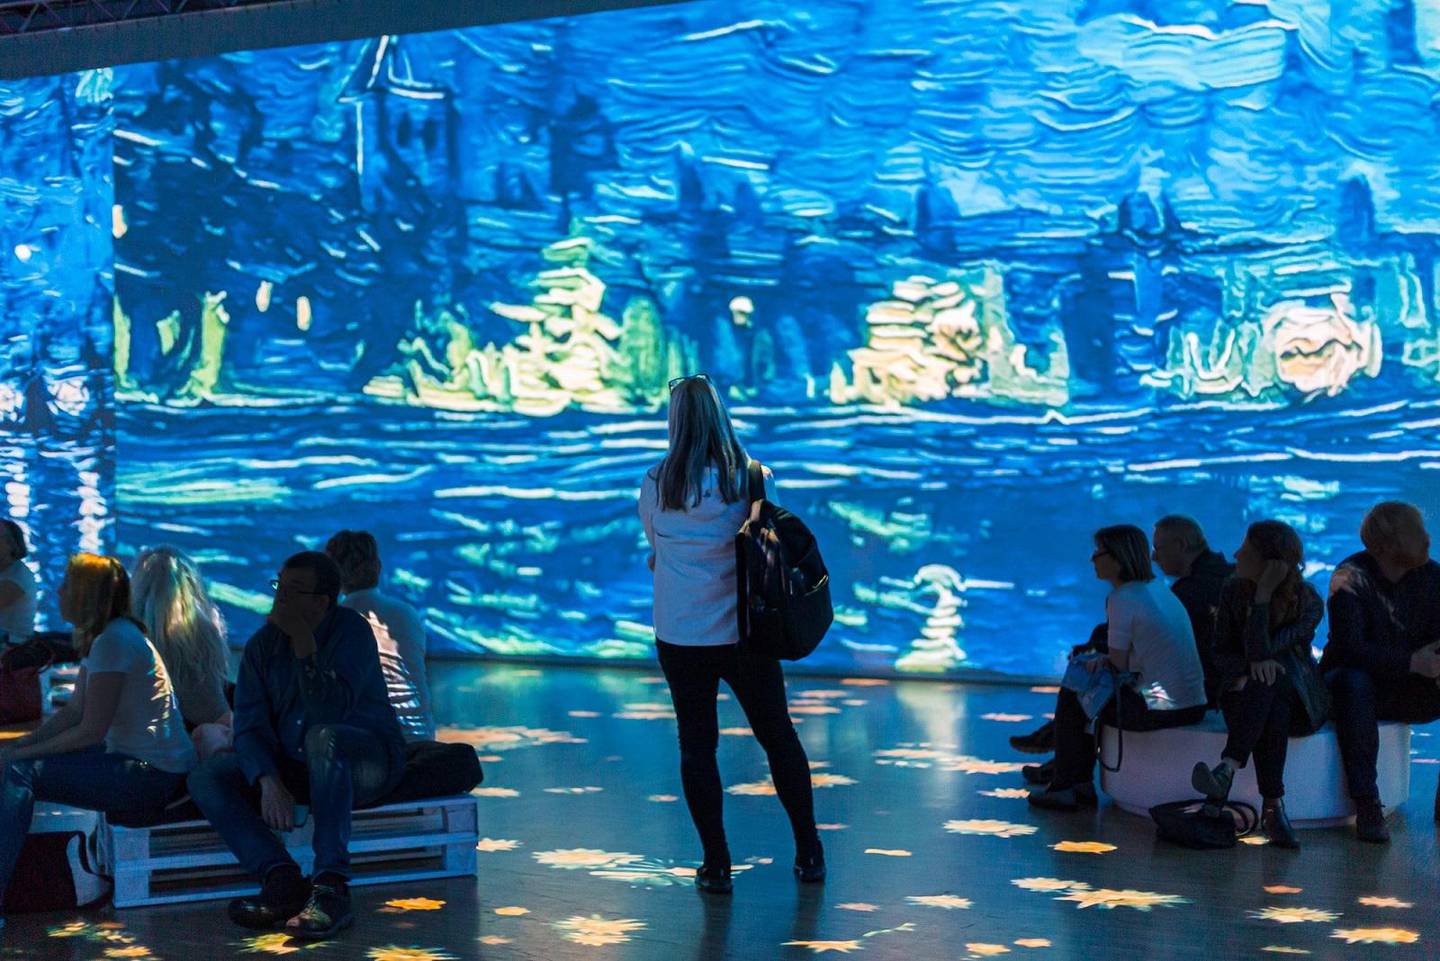 The space will be officially launched sometime later this month by hosting a fully-immersive exhibition, which will allow visitors to dive into masterpieces by Van Gogh, Claude Monet, Edvard Munch and Wassily Kandisky to name a few.  Madinat Jumeirah 